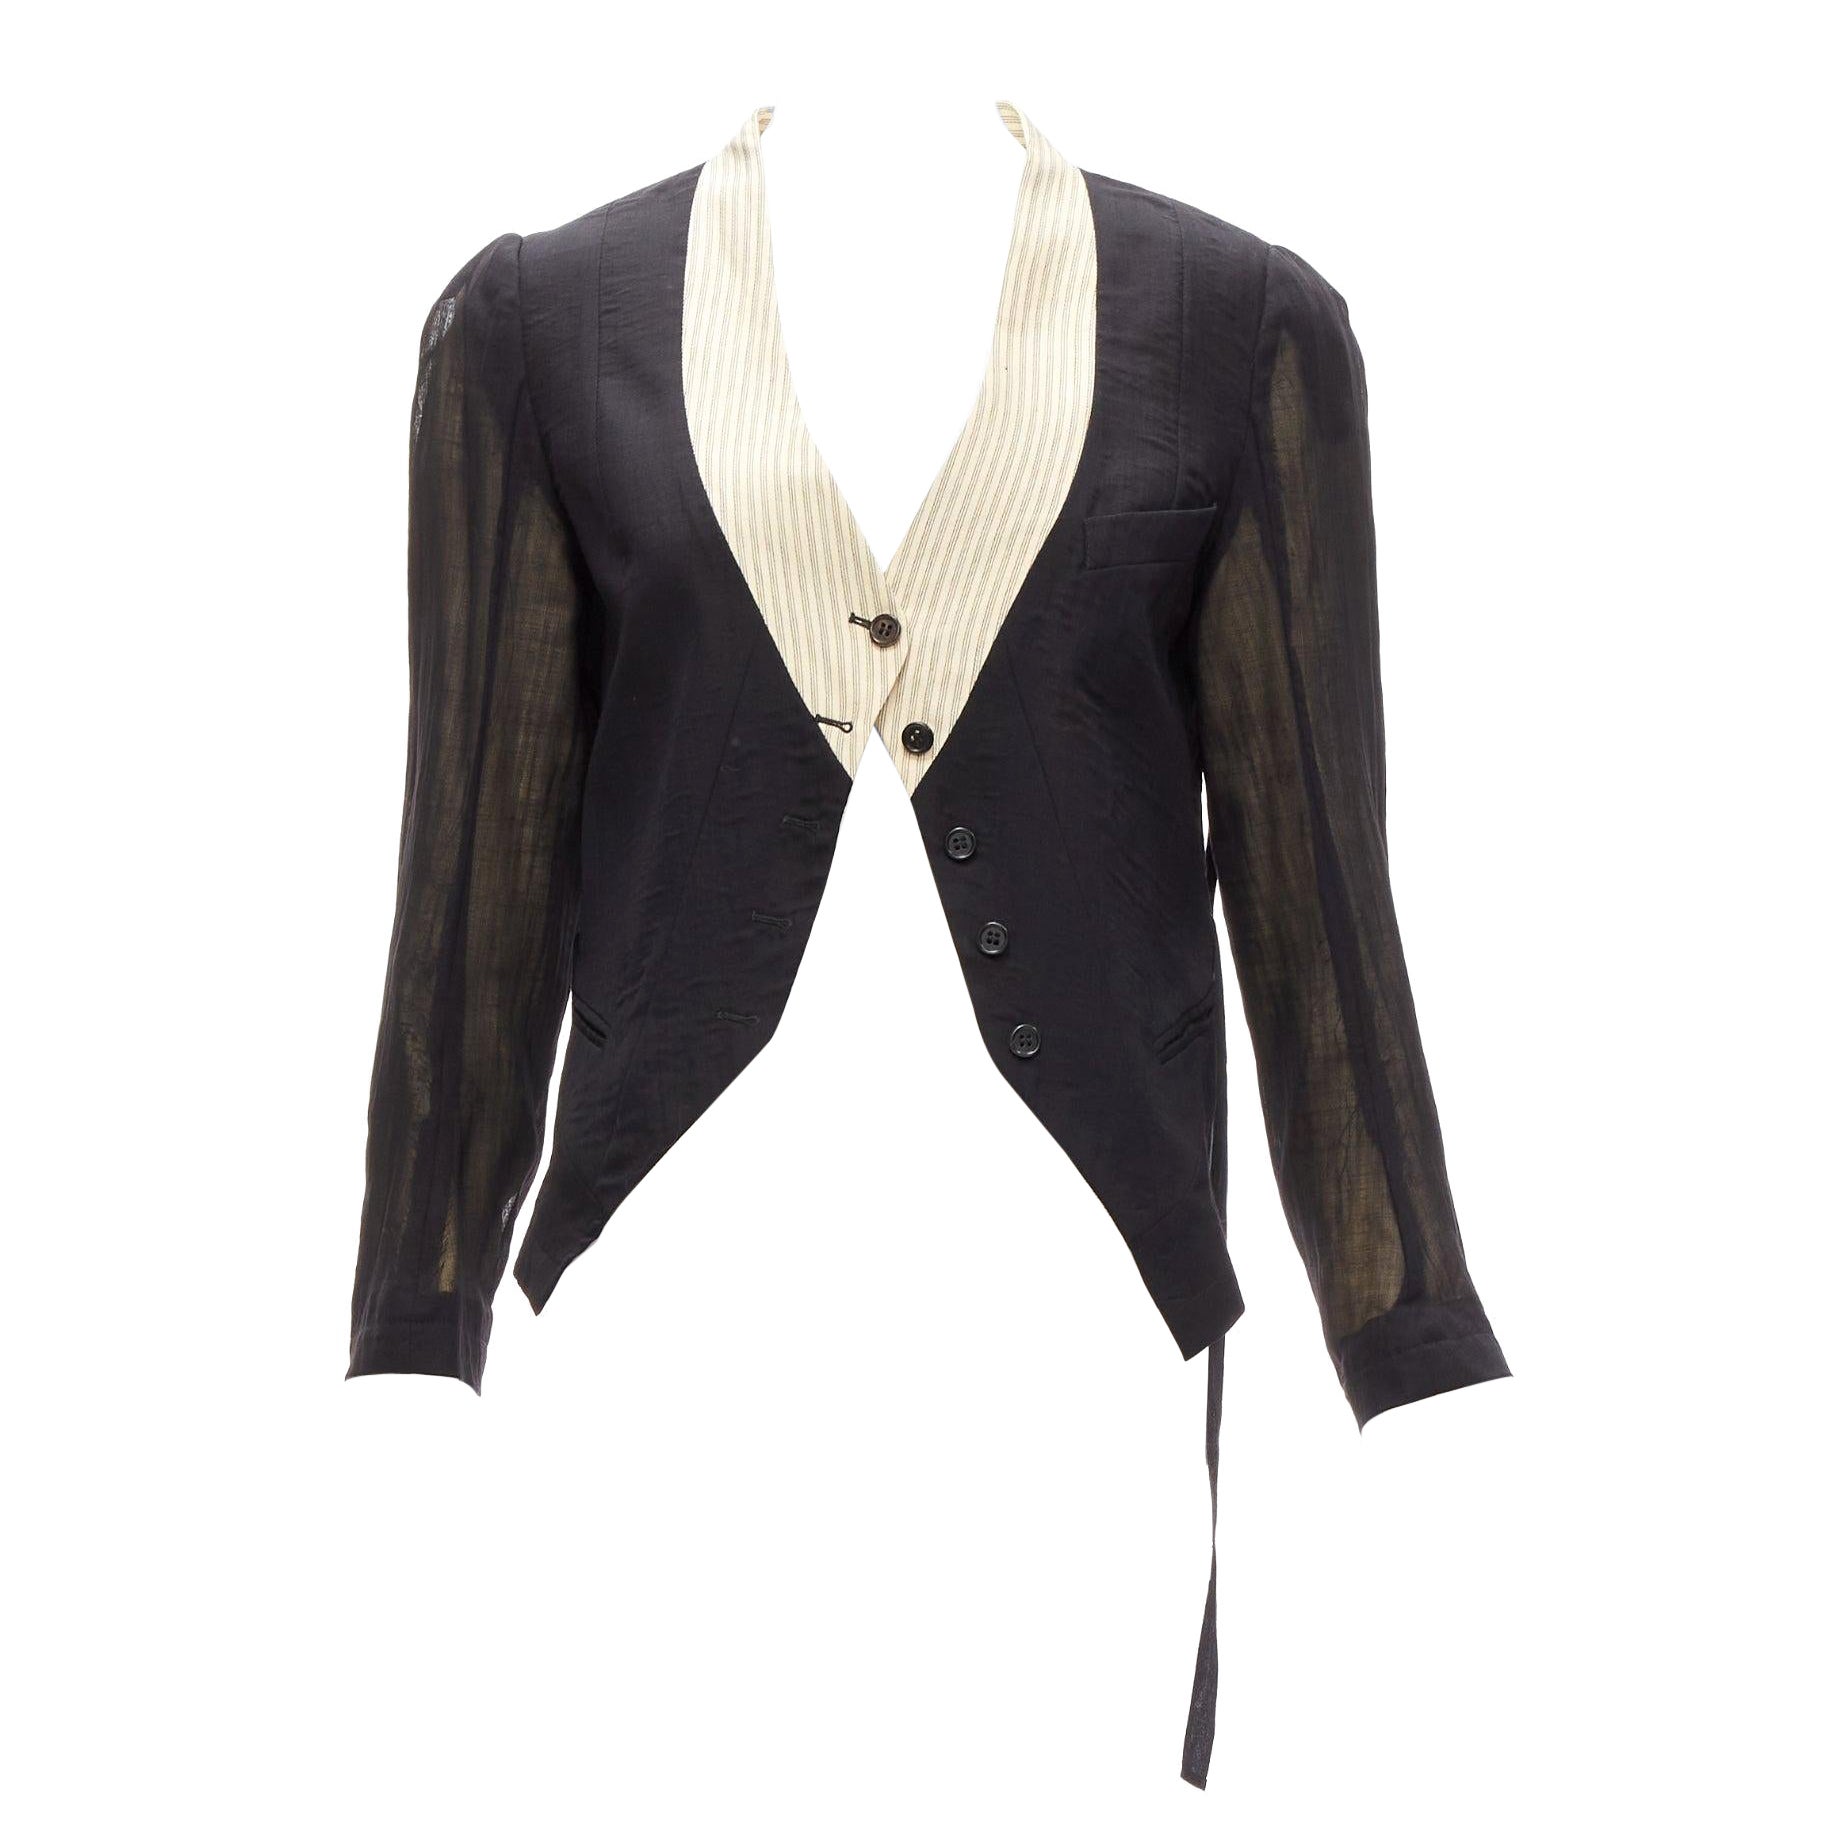 ANN DEMEULEMEESTER black overlay sheer cream topstitched jacket FR36 S For Sale